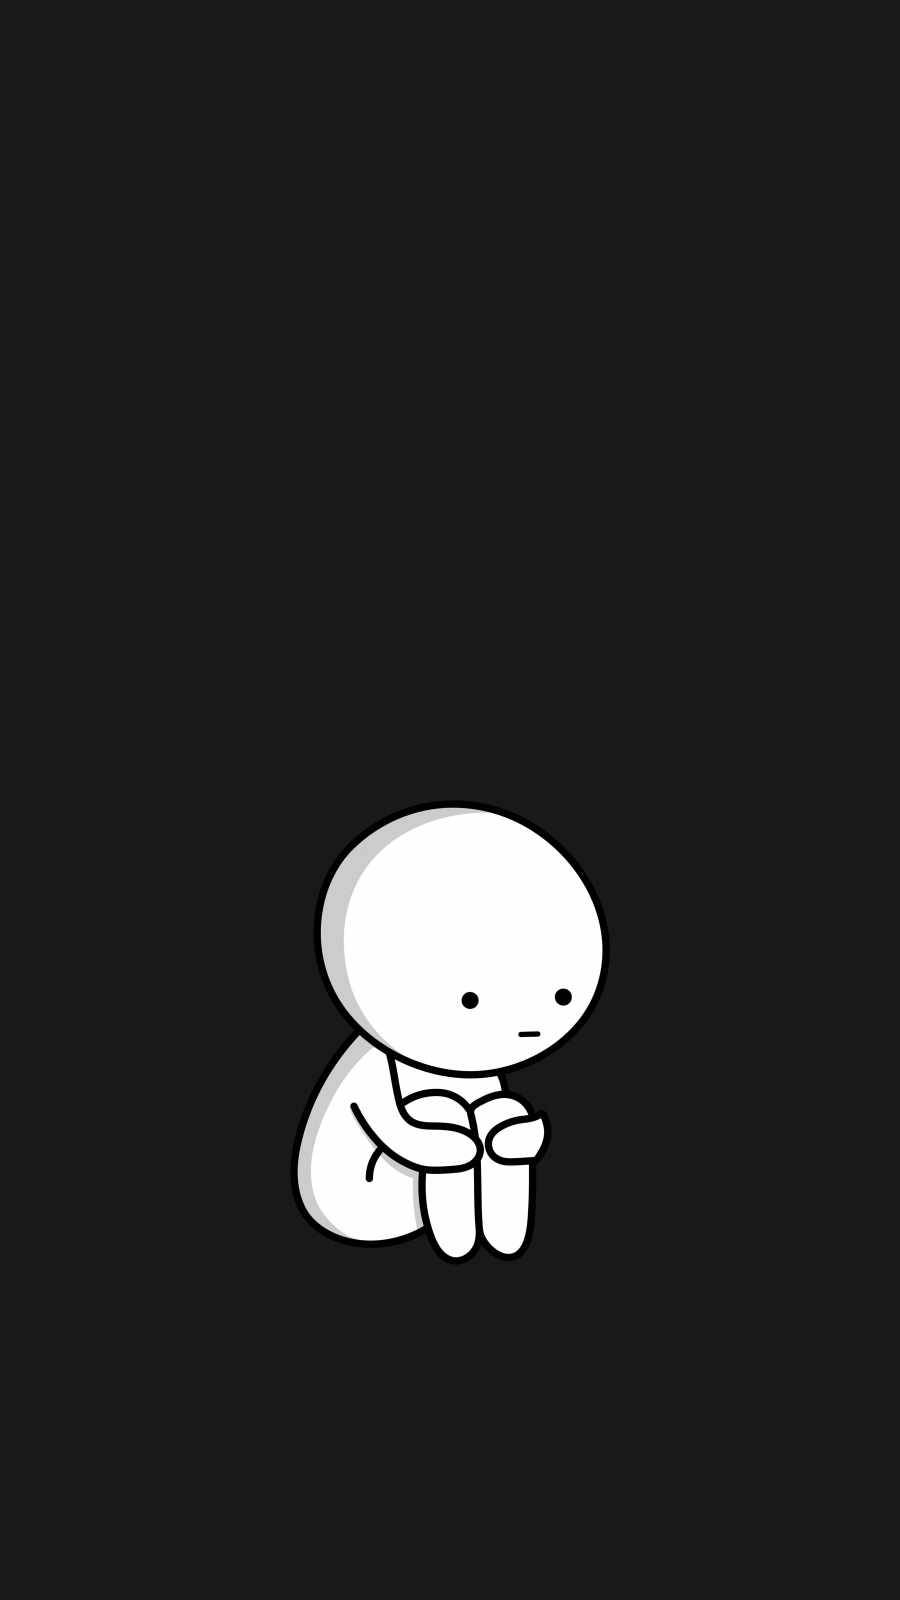 Sad&Lonely Person Iphone Wallpaper